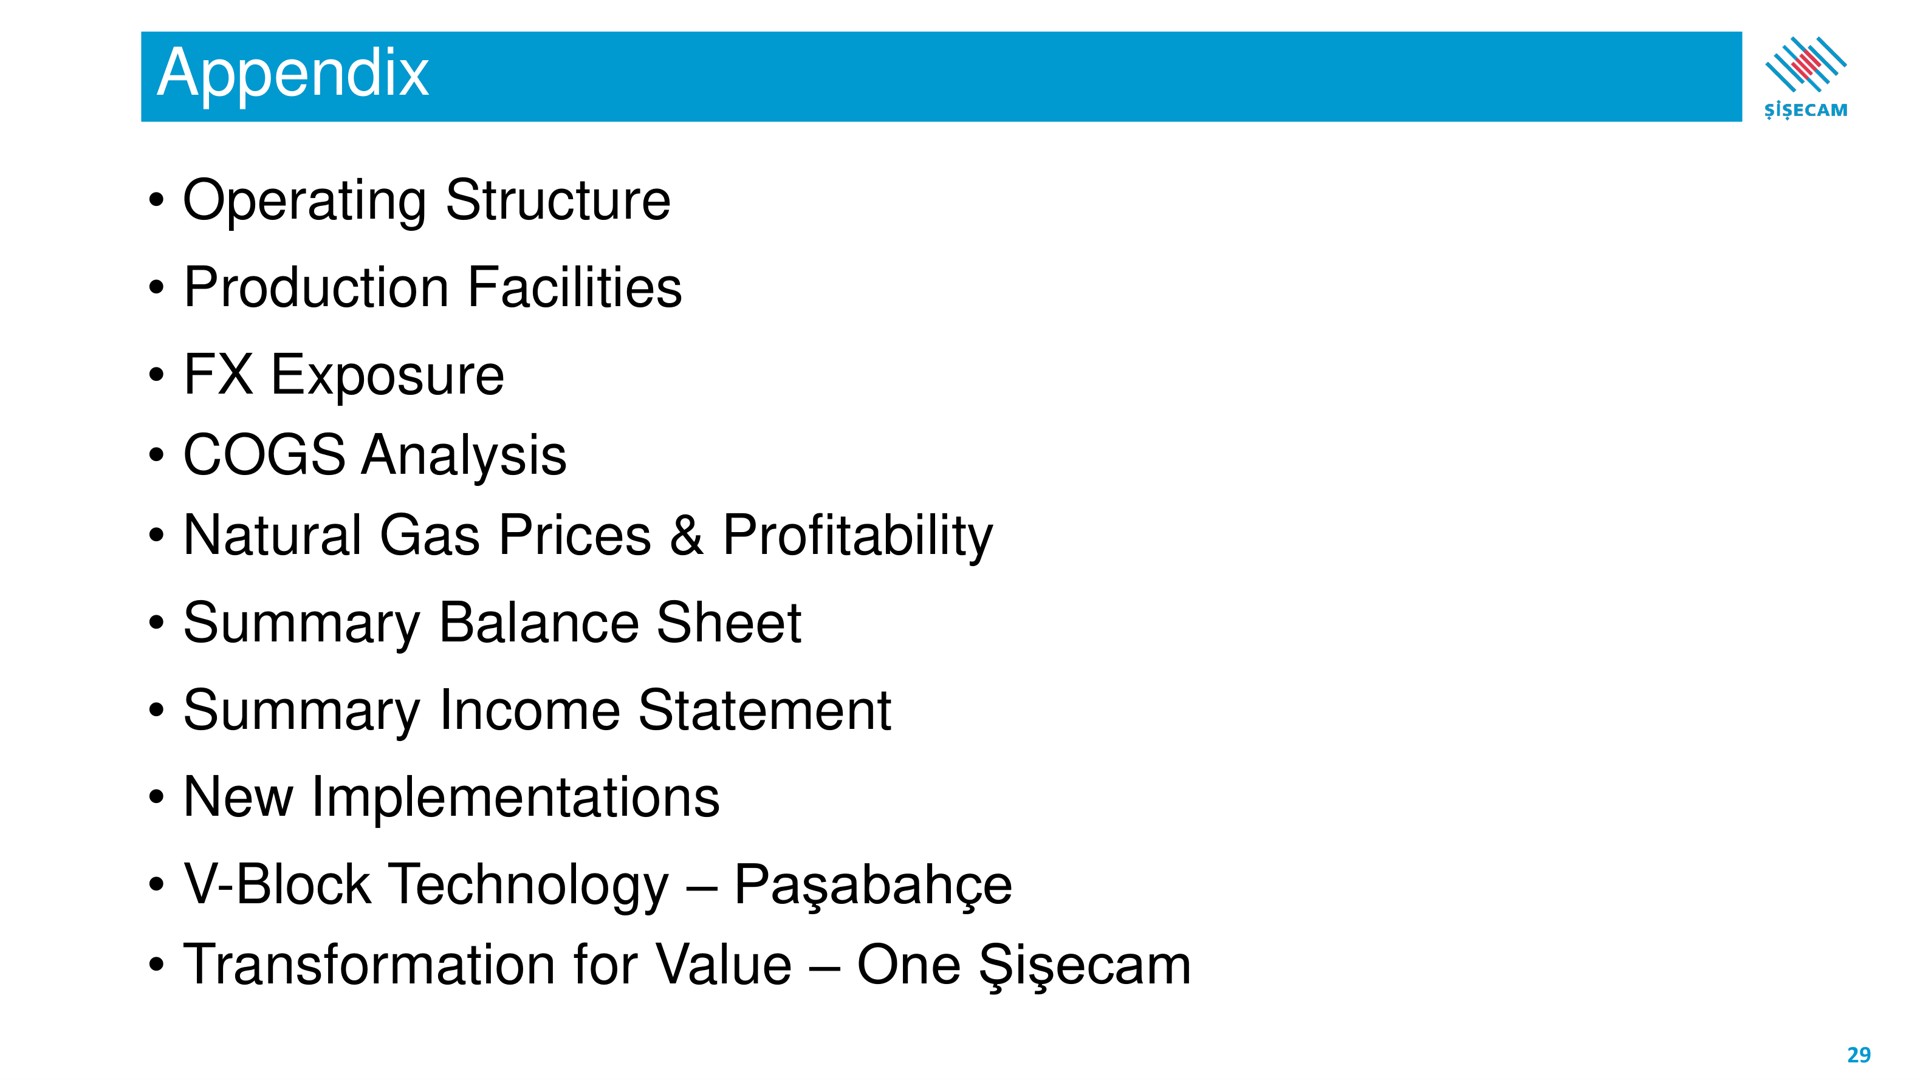 appendix operating structure production facilities exposure cogs analysis natural gas prices profitability summary balance sheet summary income statement new implementations block technology transformation for value one i | Sisecam Resources